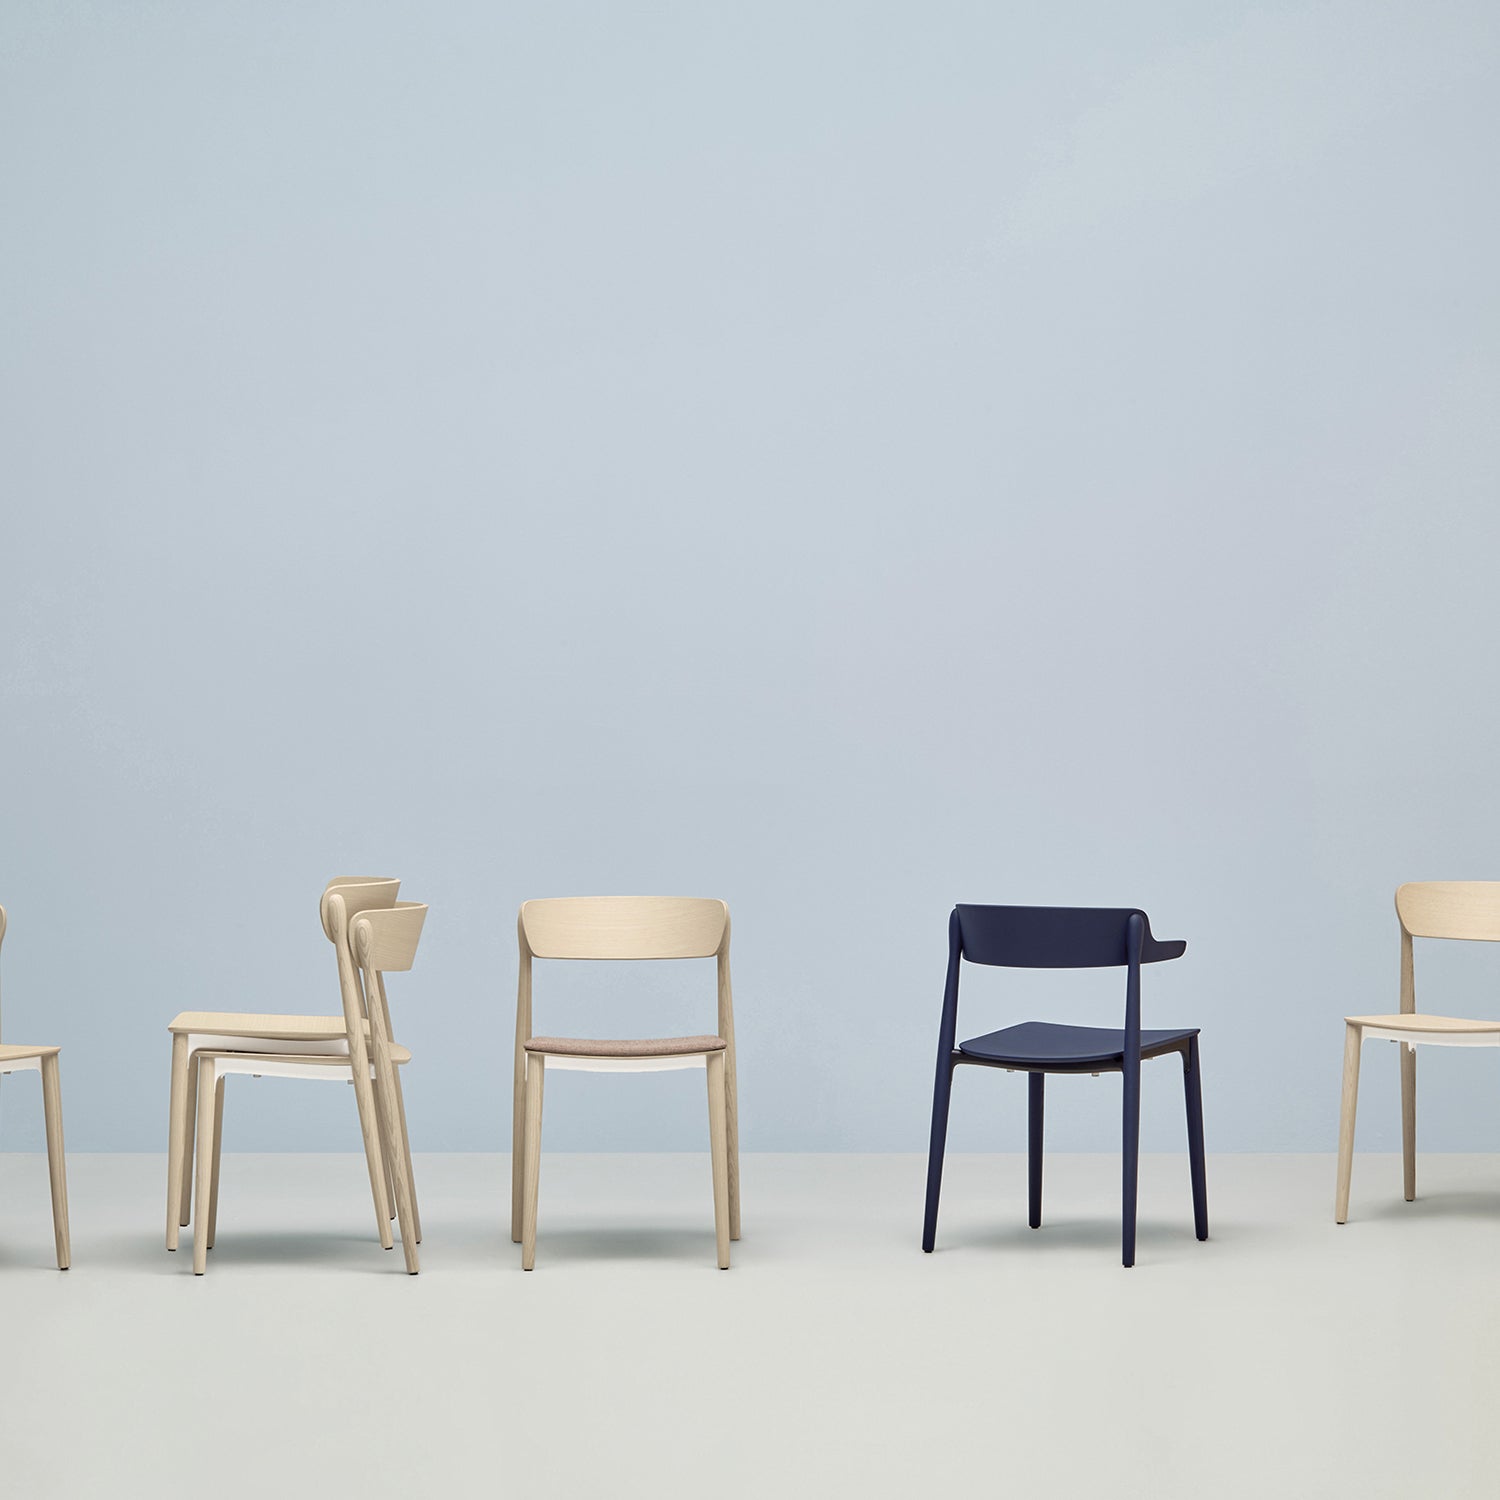 Pedrali Nemea 2820 and 2825 dining chairs in light blue studio setting